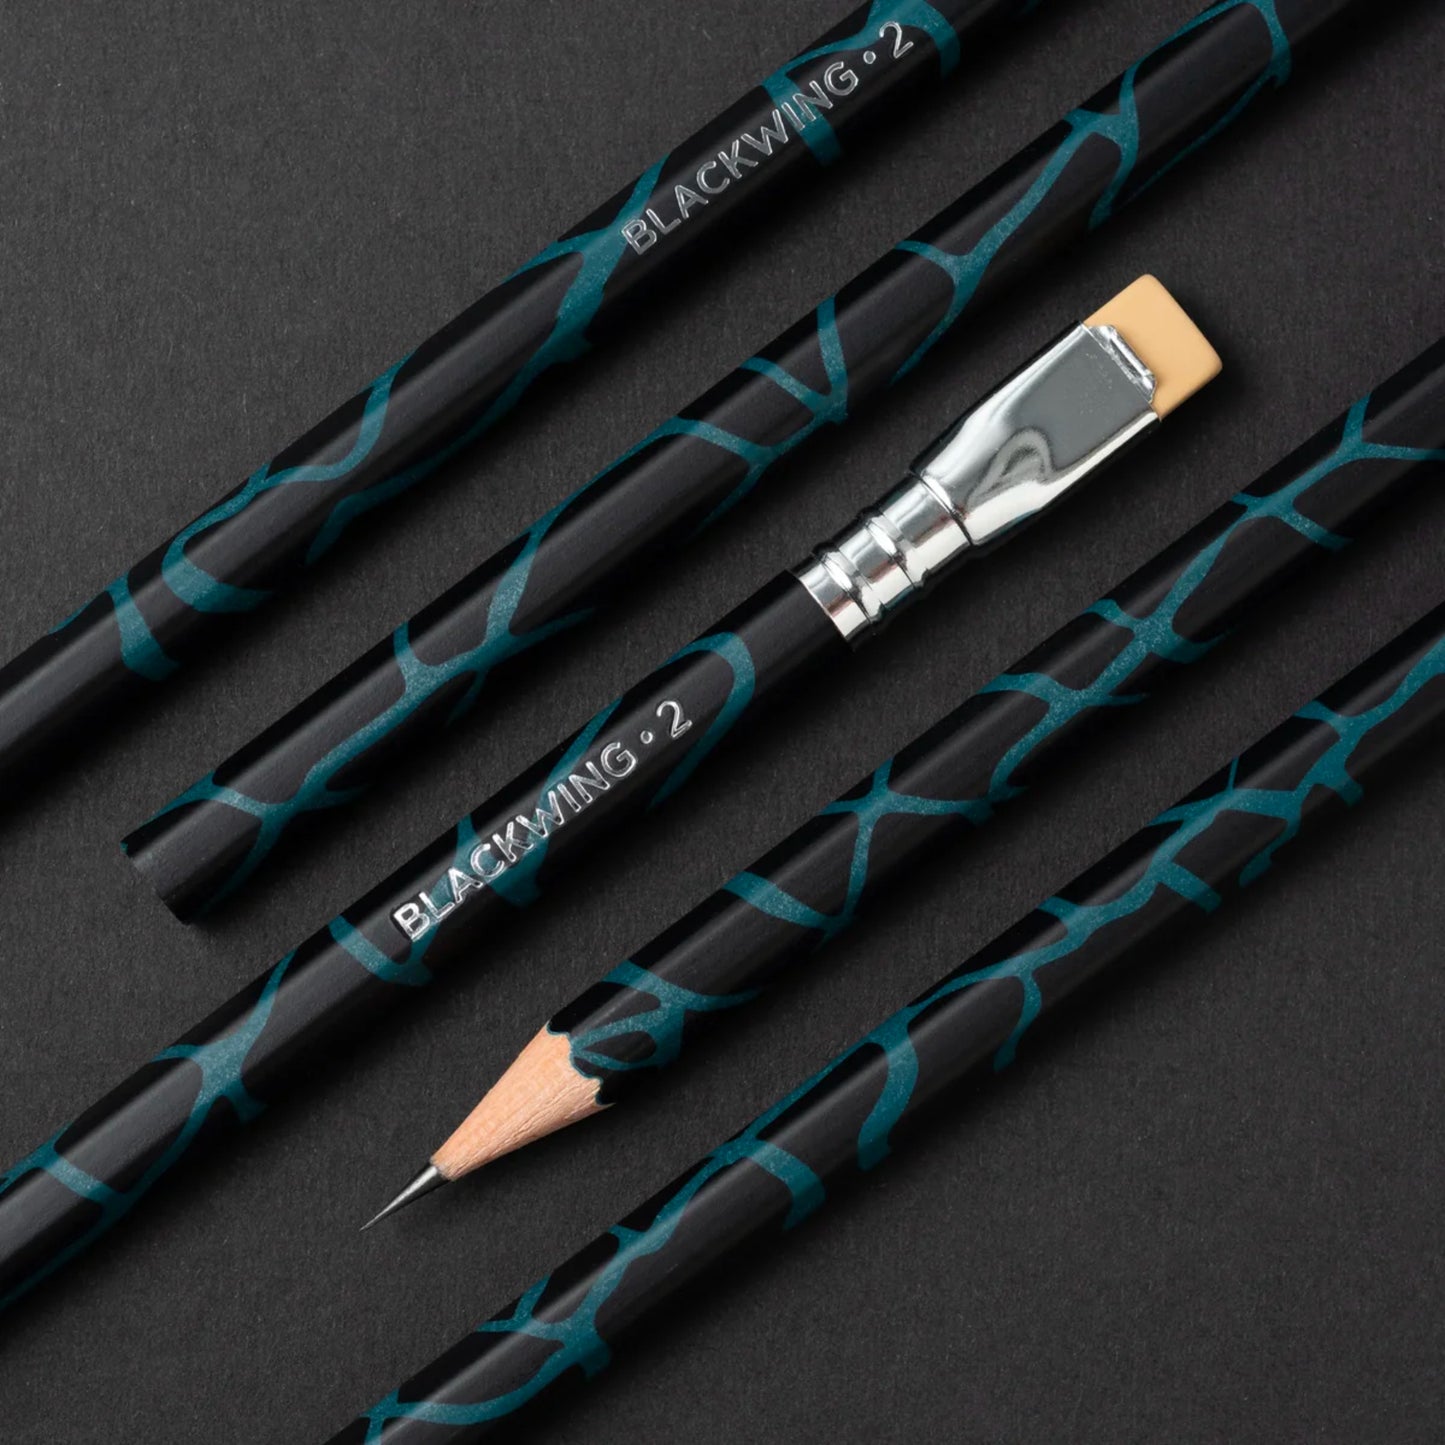 Blackwing Limited Edition Set of 12